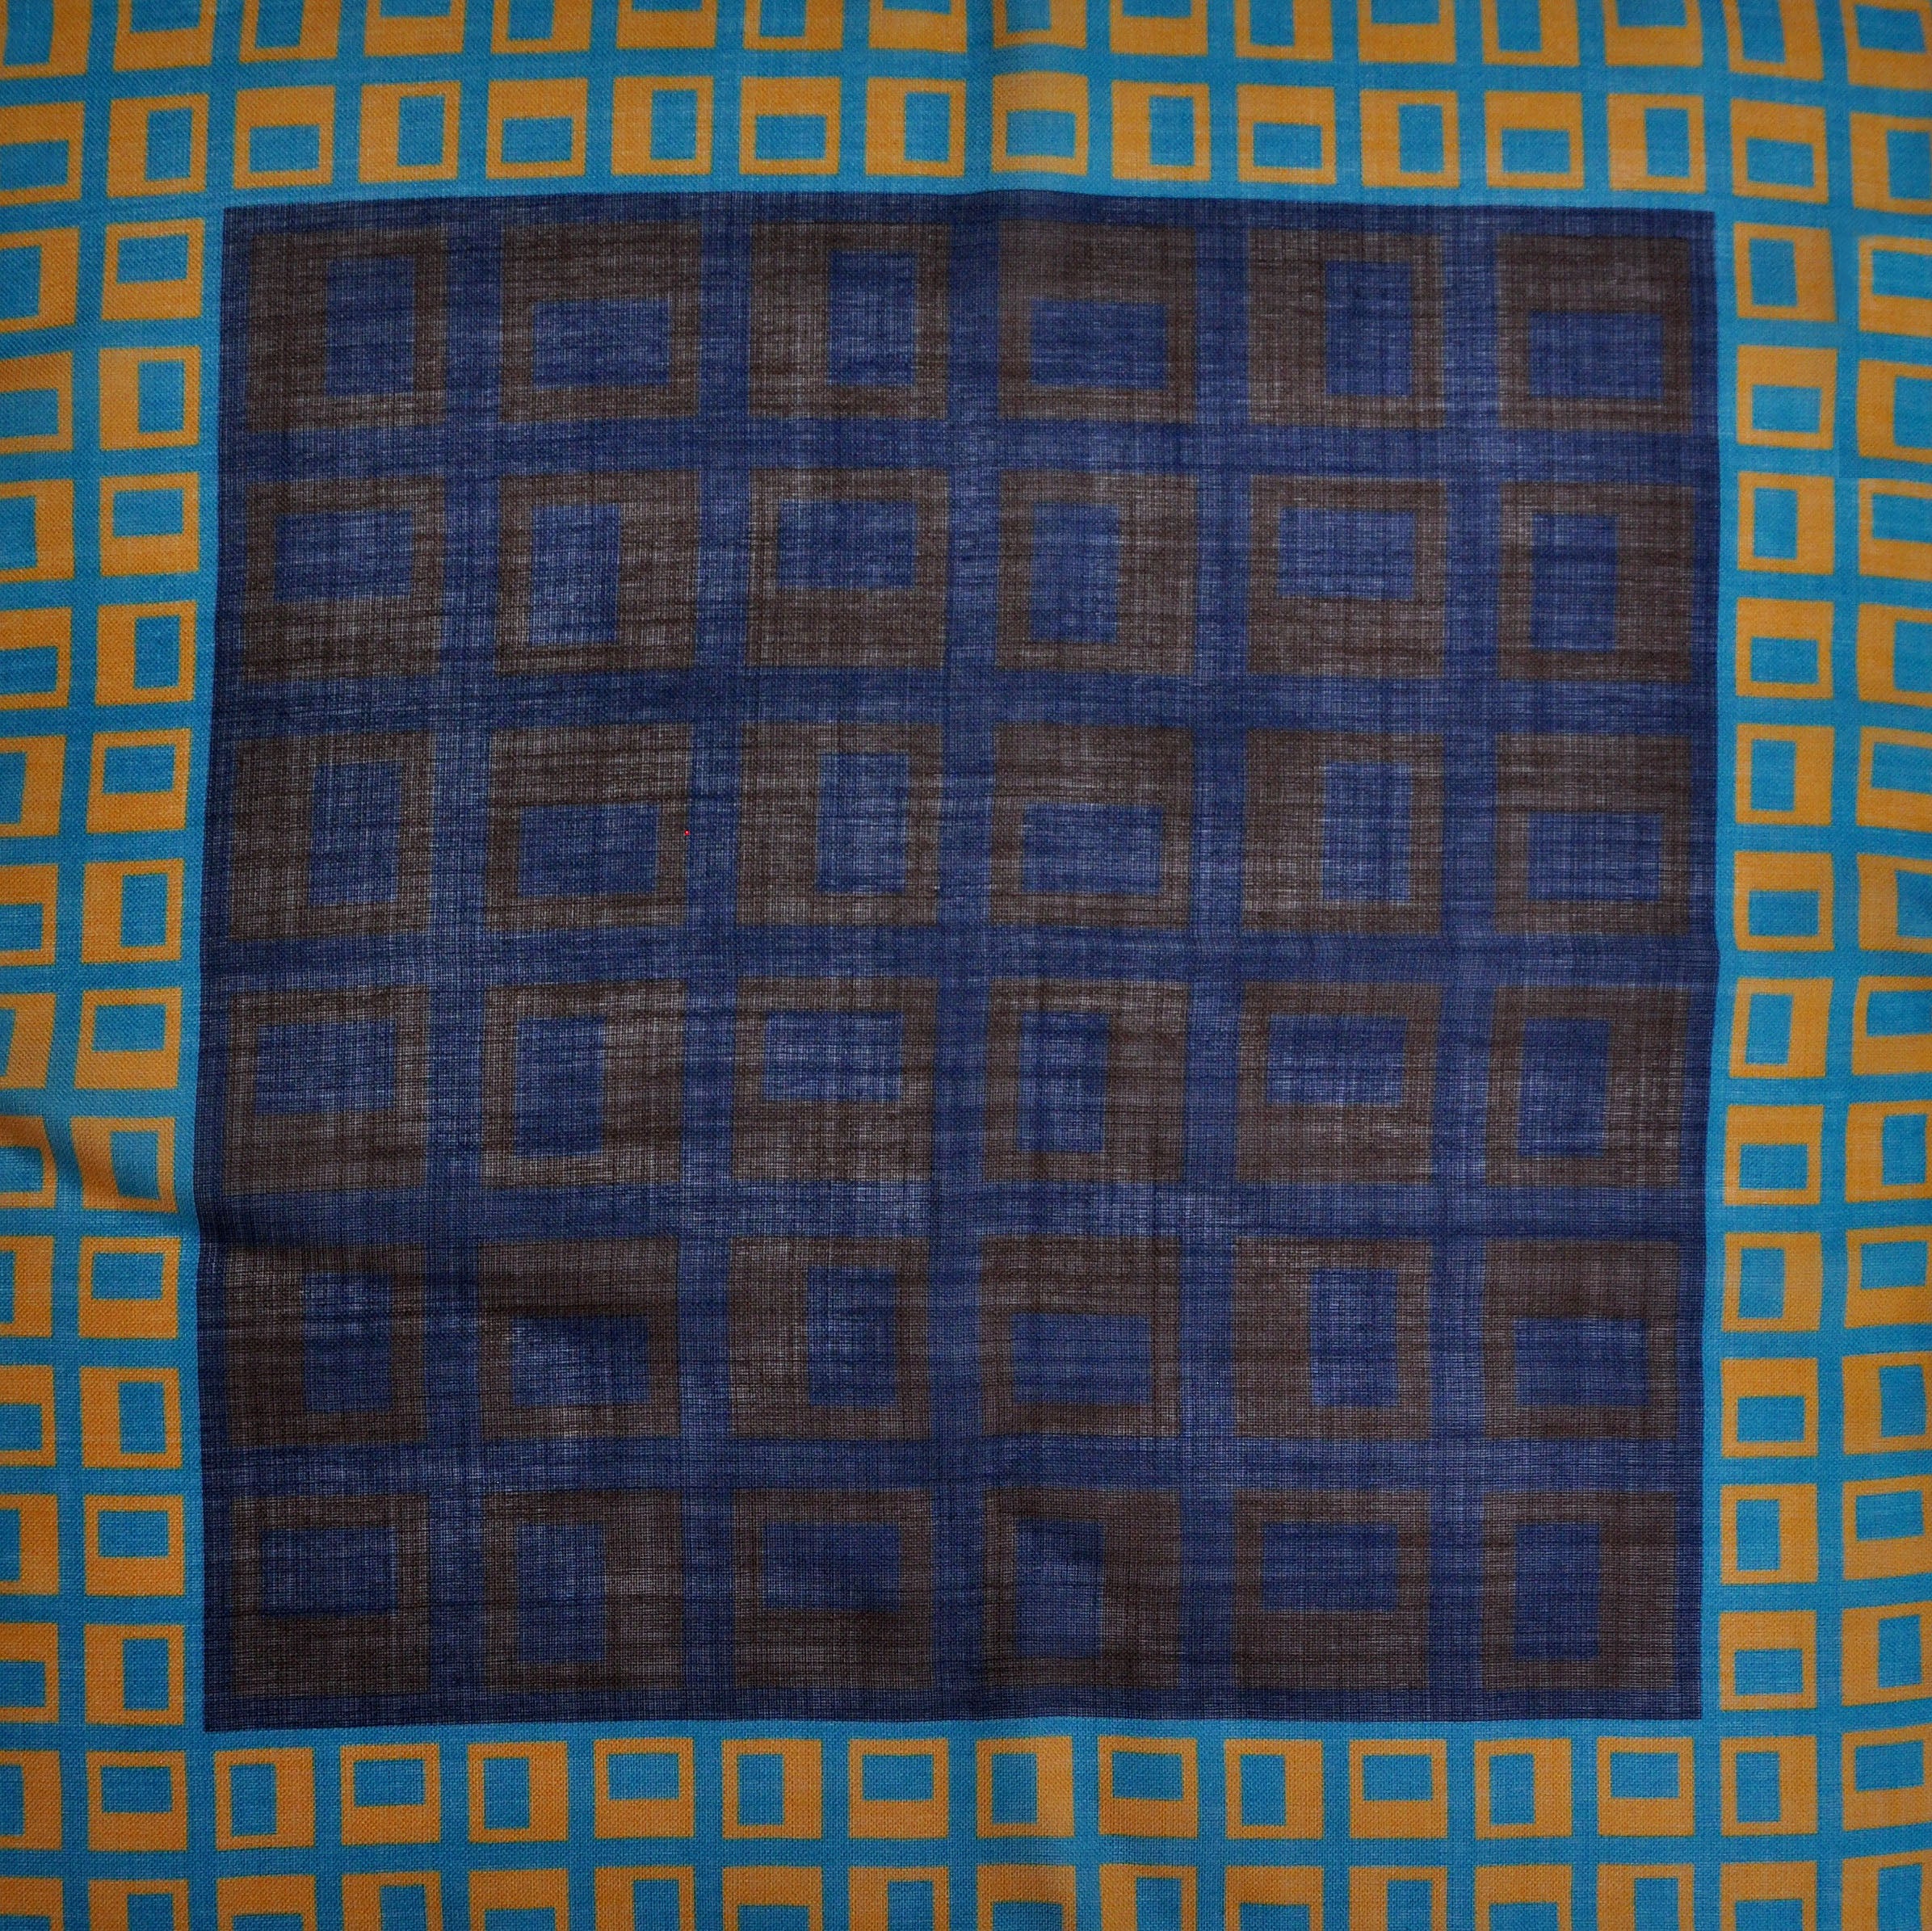 Geometric Squares Wool & Silk Pocket Square in Navy, Brown, Teal & Ochre